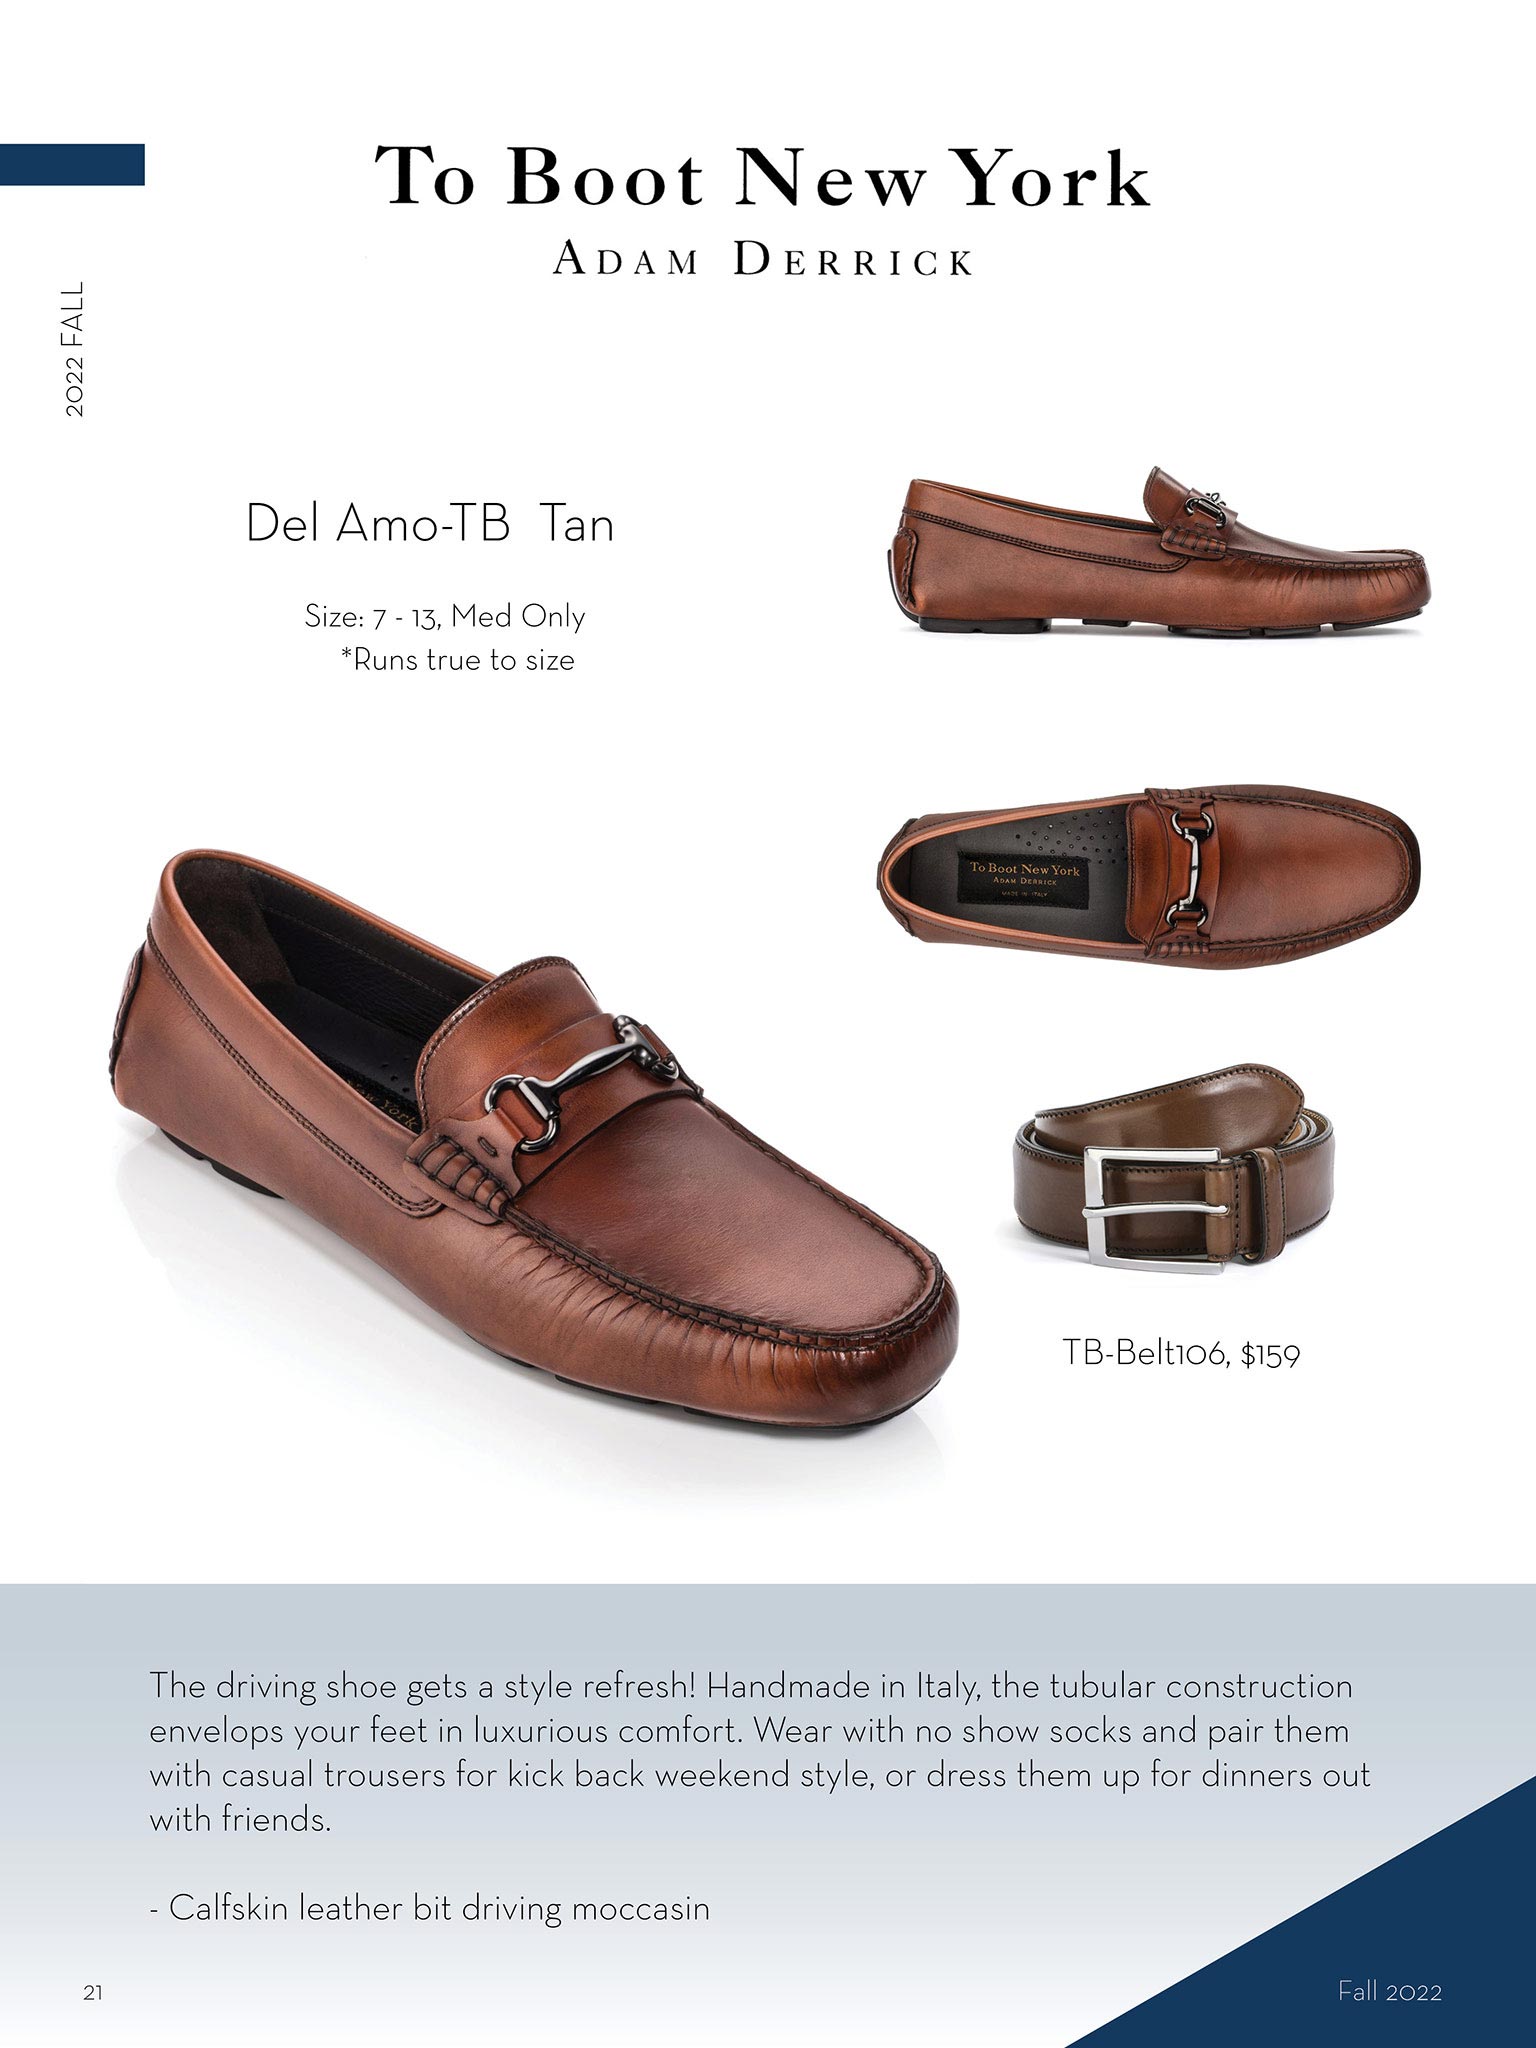 To Boot New York Shoes & Belts